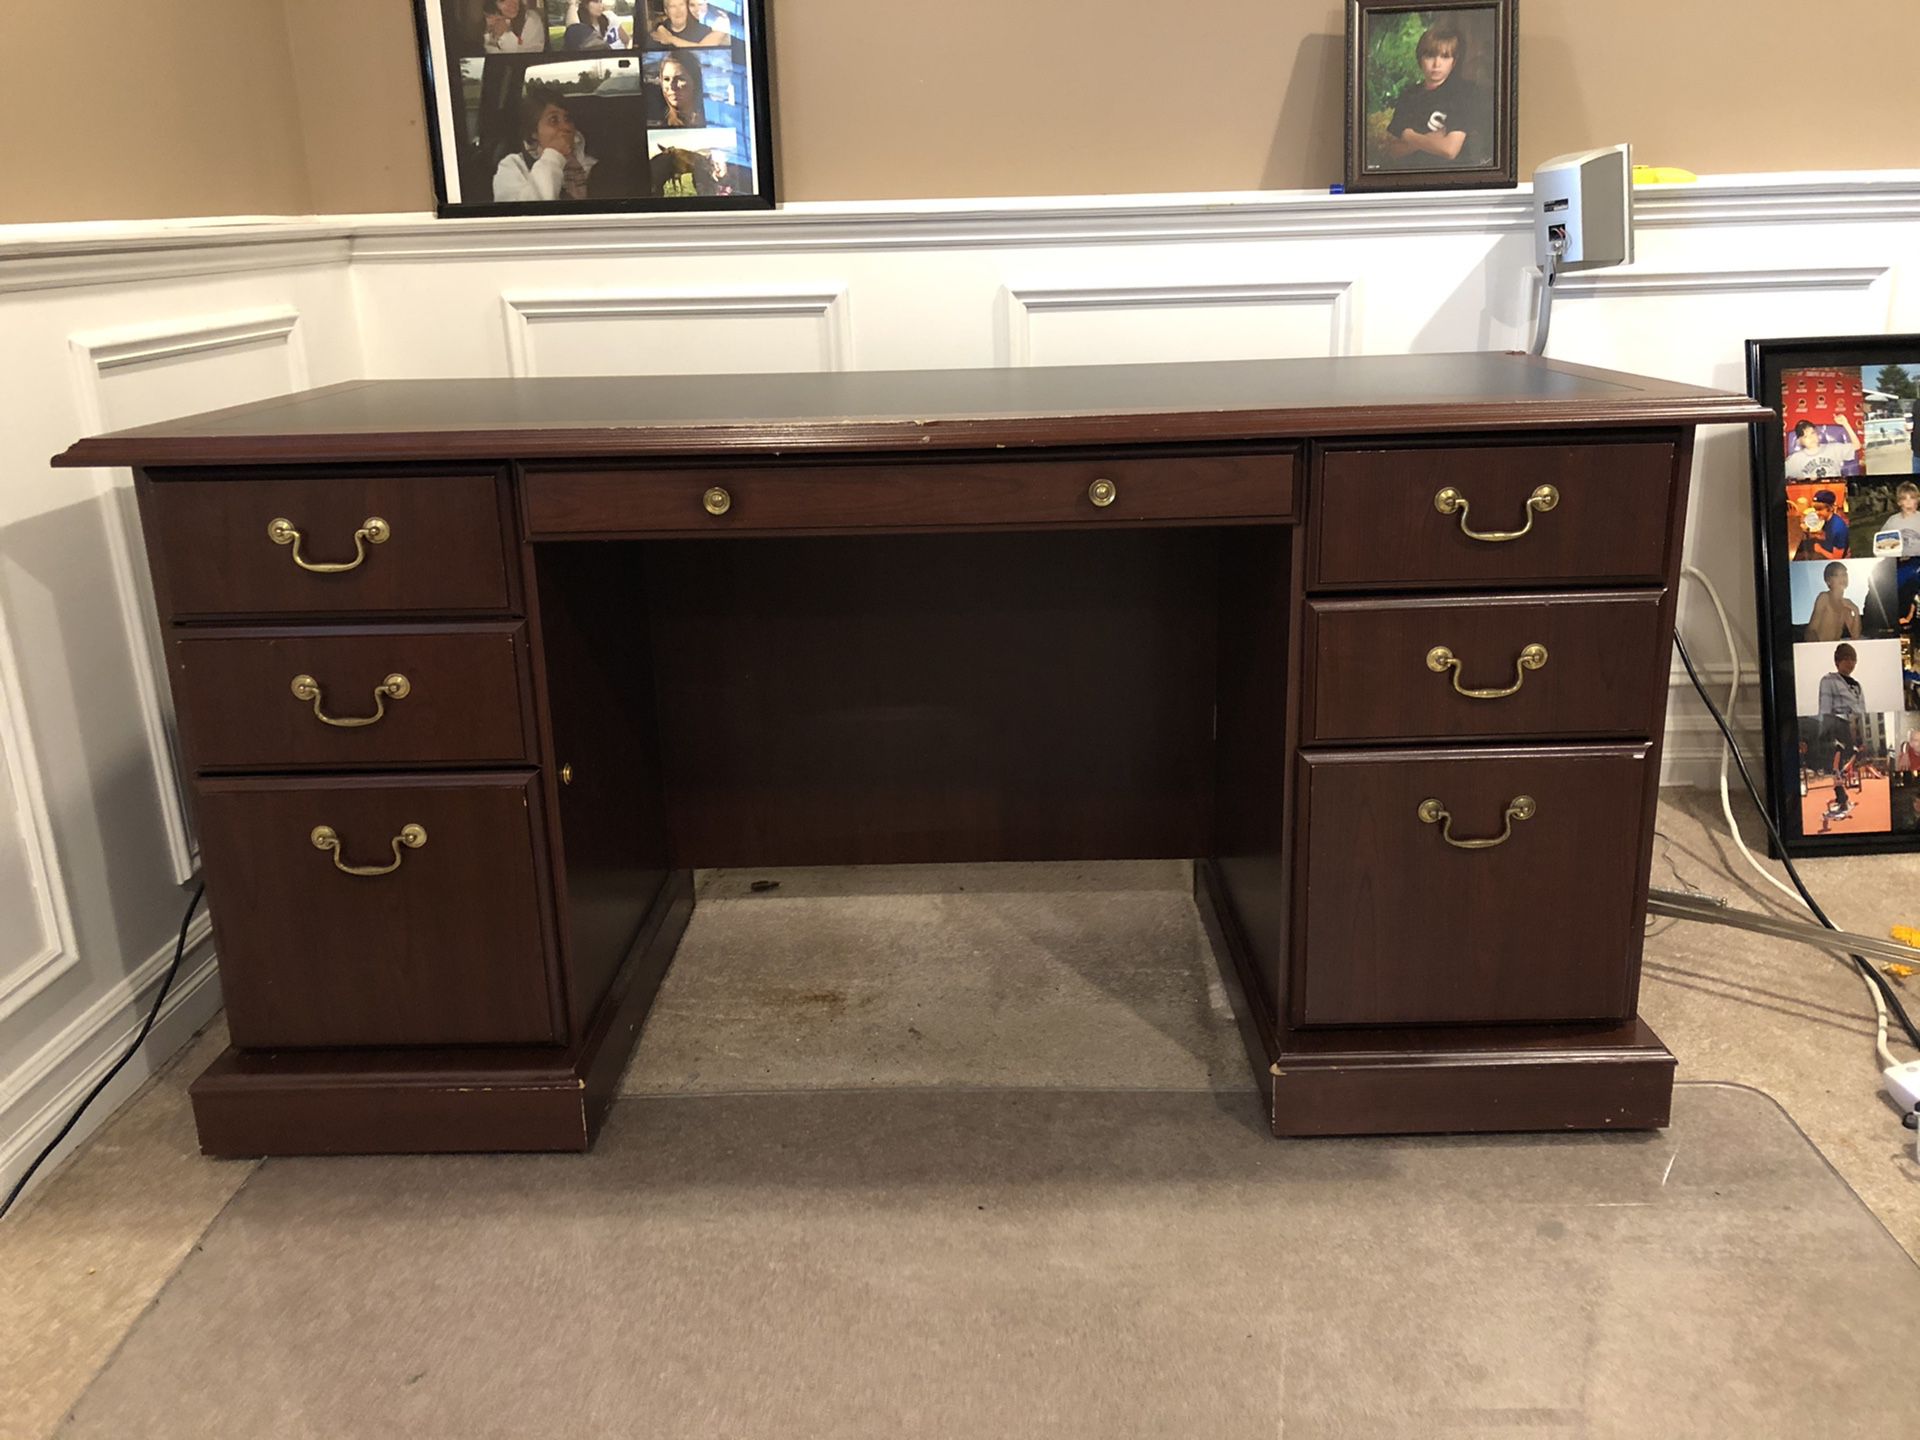 Big desk with one locking file cabinet.